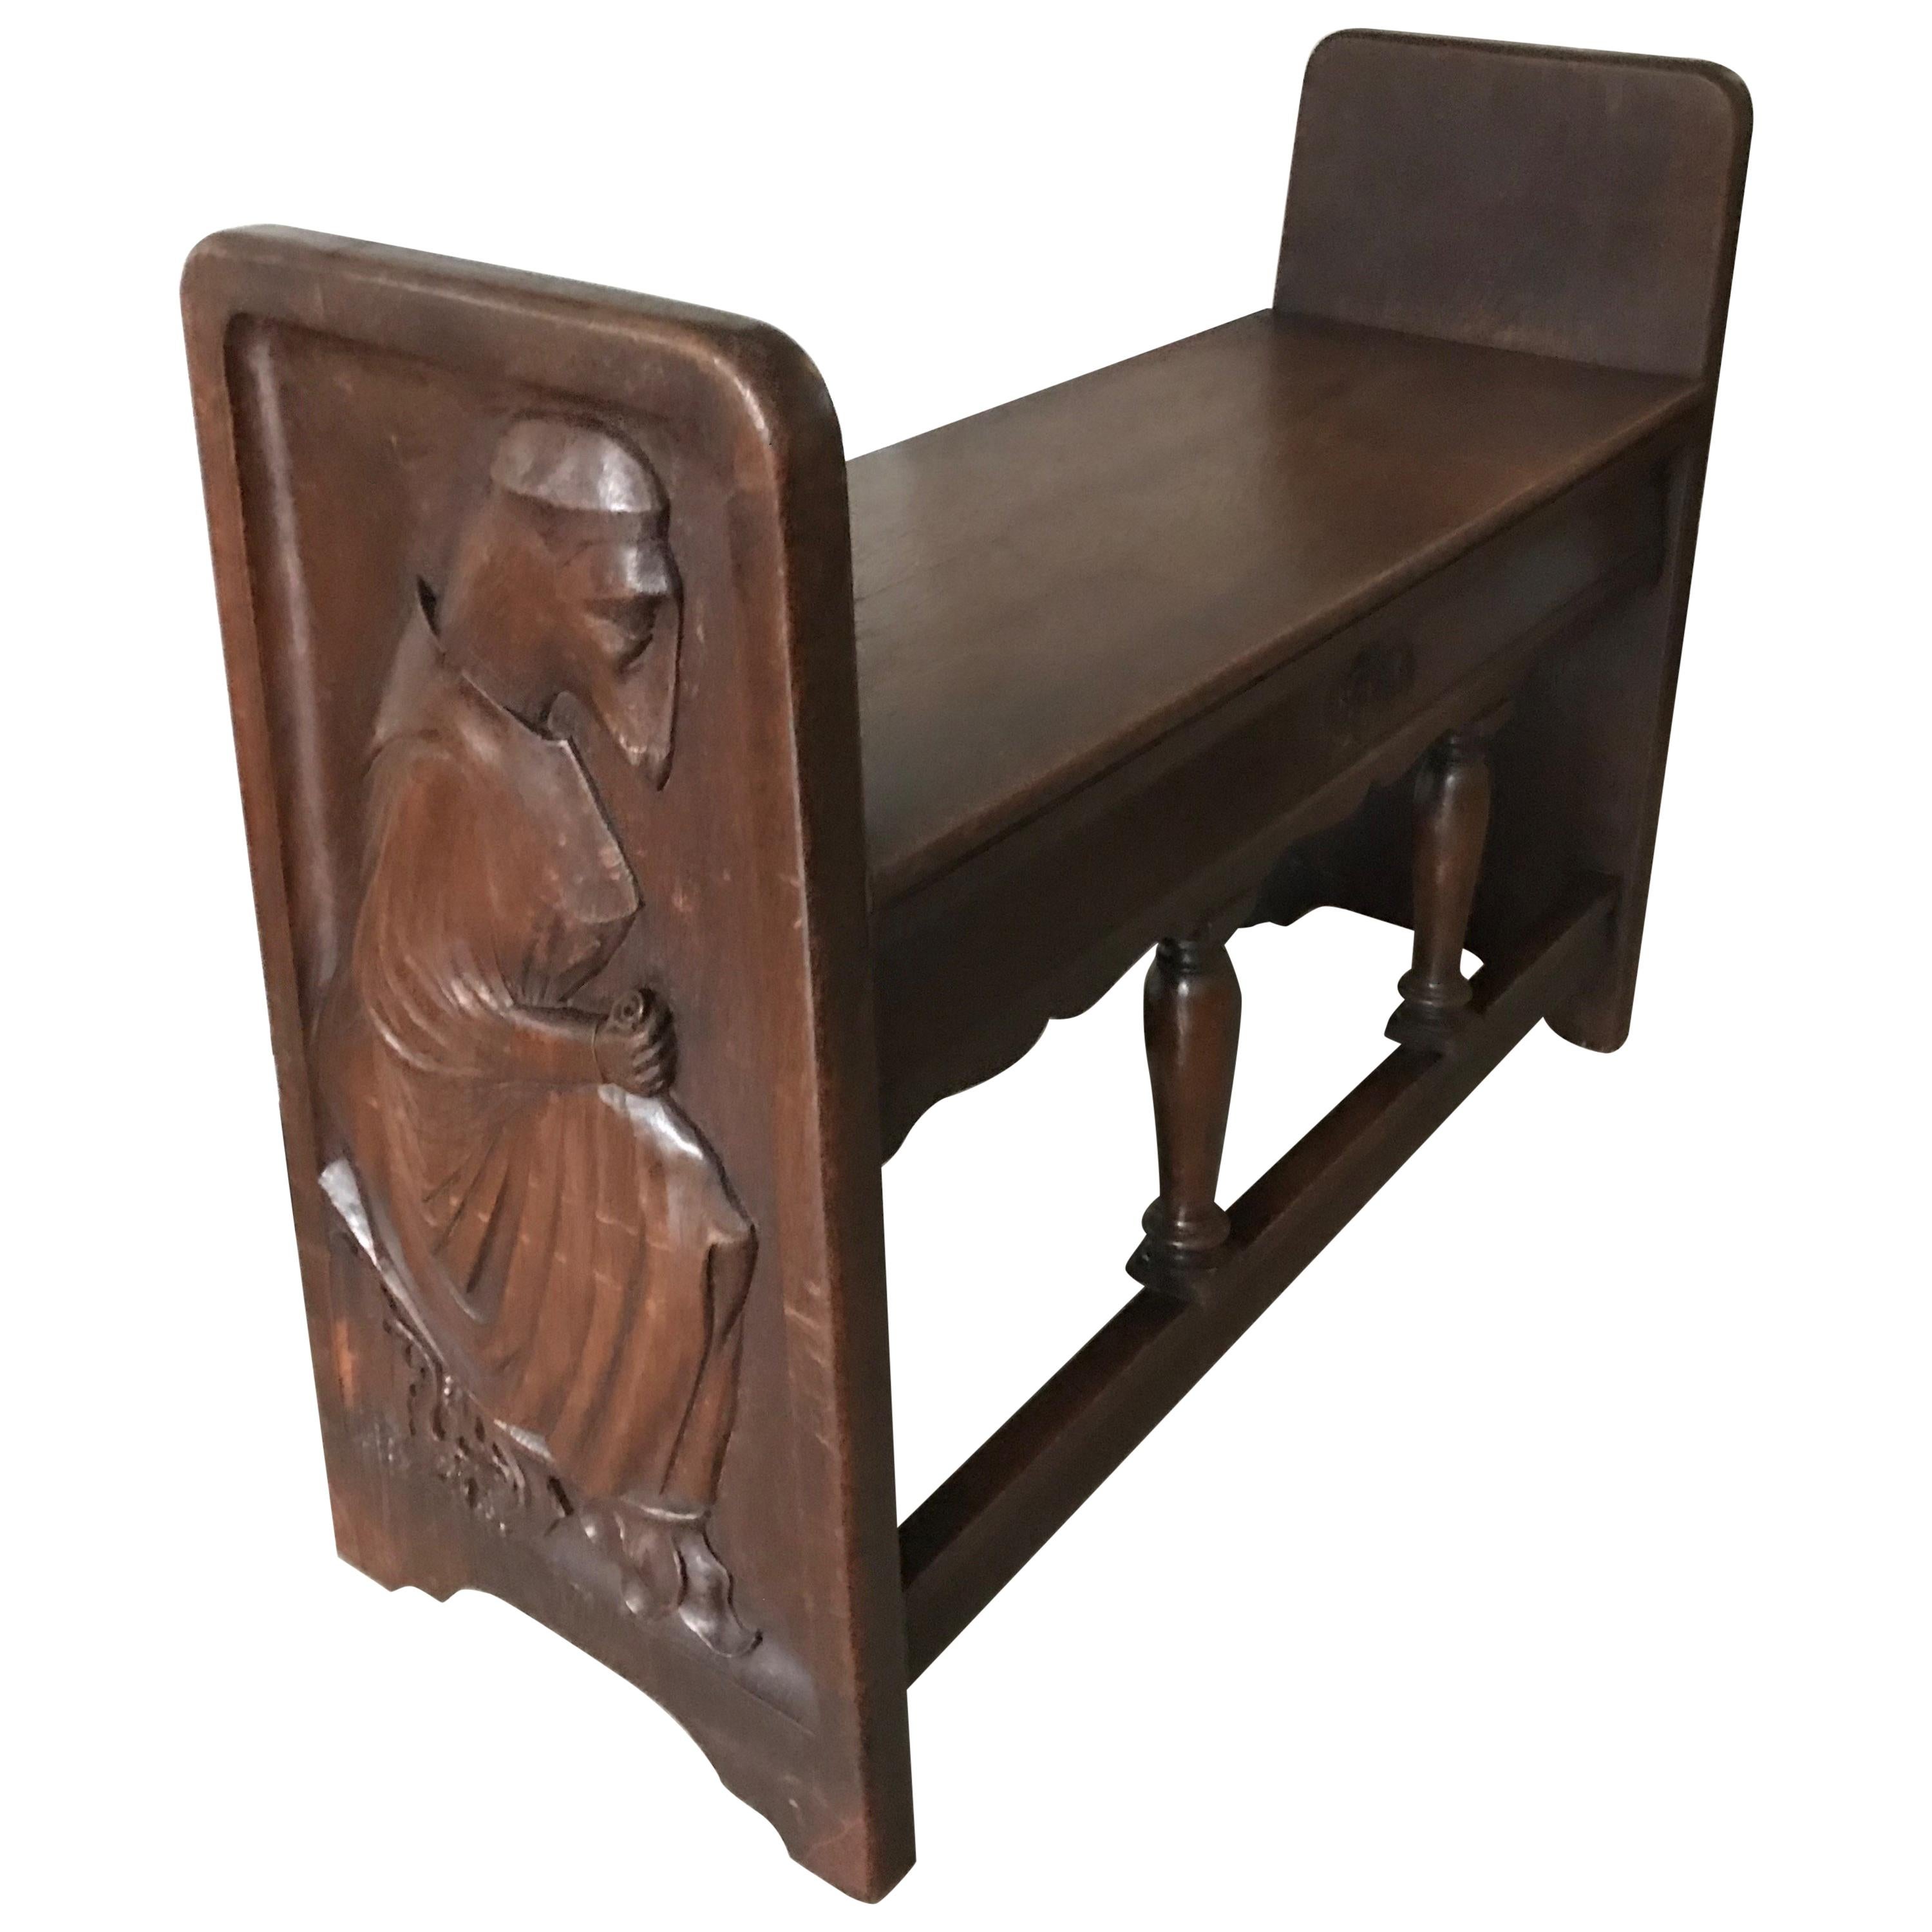 Gothic Revival Stool, Bench with Hand Carved Sheep and Wolve Biblical Sculptures